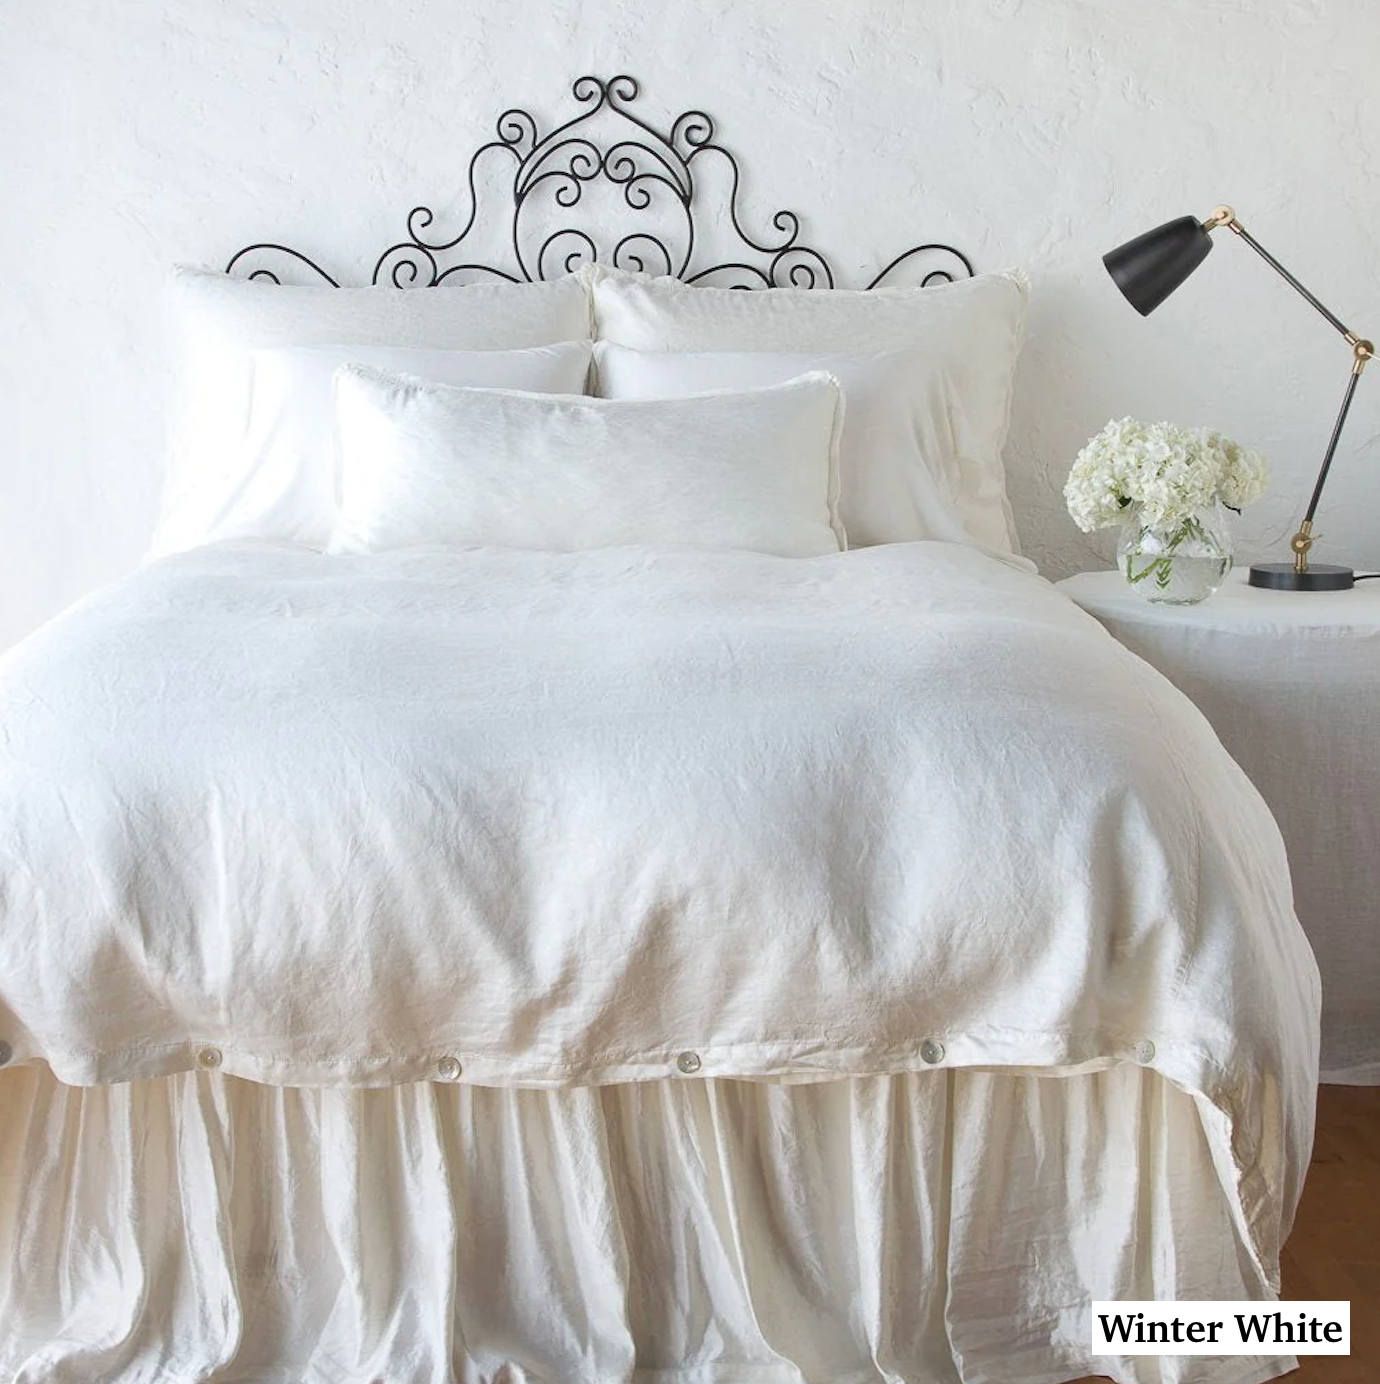 Paloma silk & linen duvet cover and shams by Bella Notte (**to order)